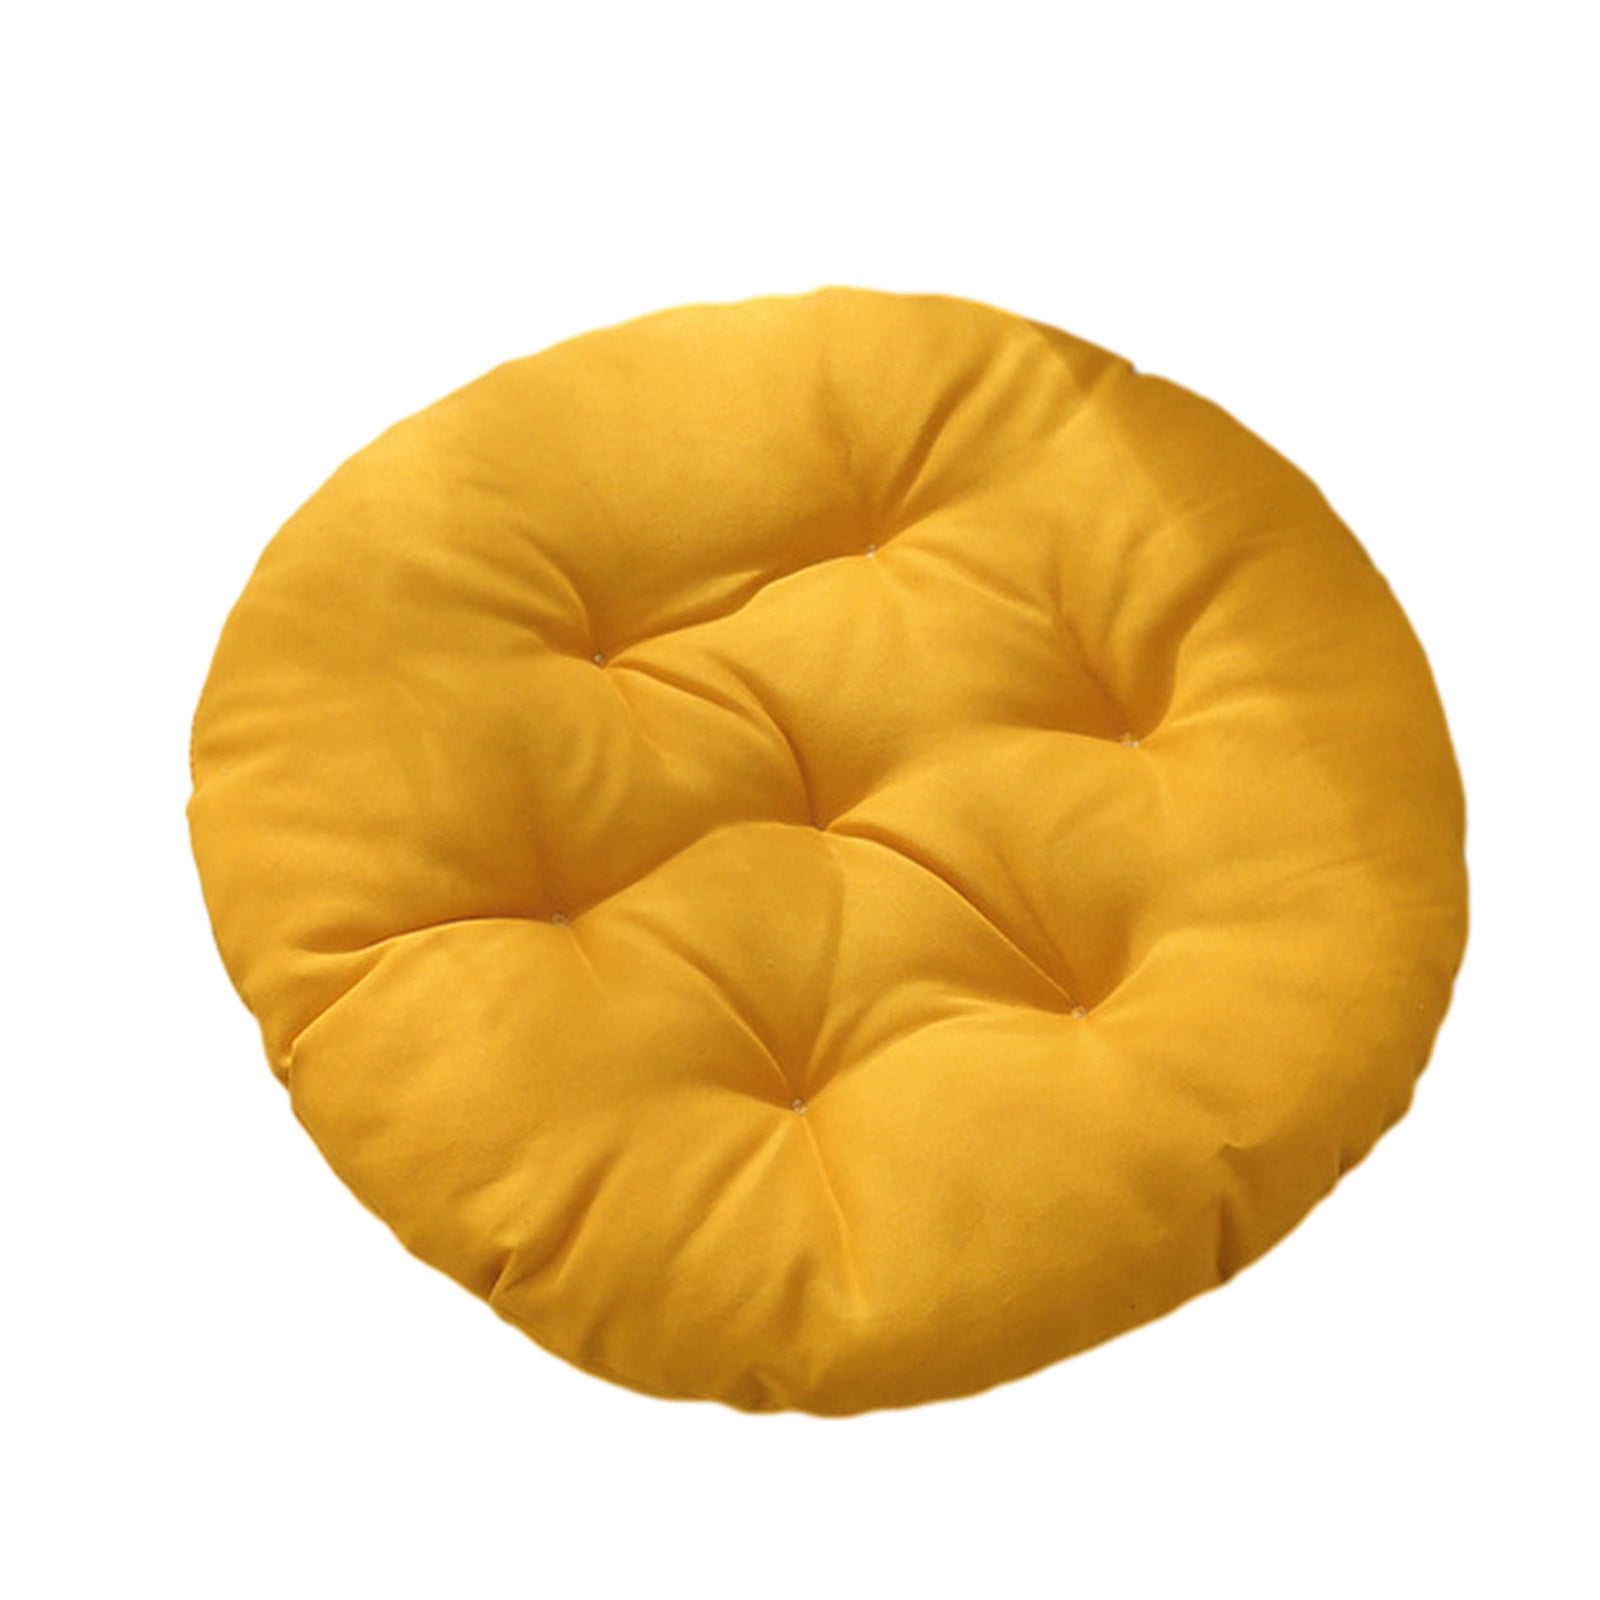 Hoksml Christmas Clearance Deals Home Supplies Outdoor Garden Patio Home Kitchen Office Sofa Chair Seat Soft Cushion Pad Bedding, Size: 14.96*7.09*